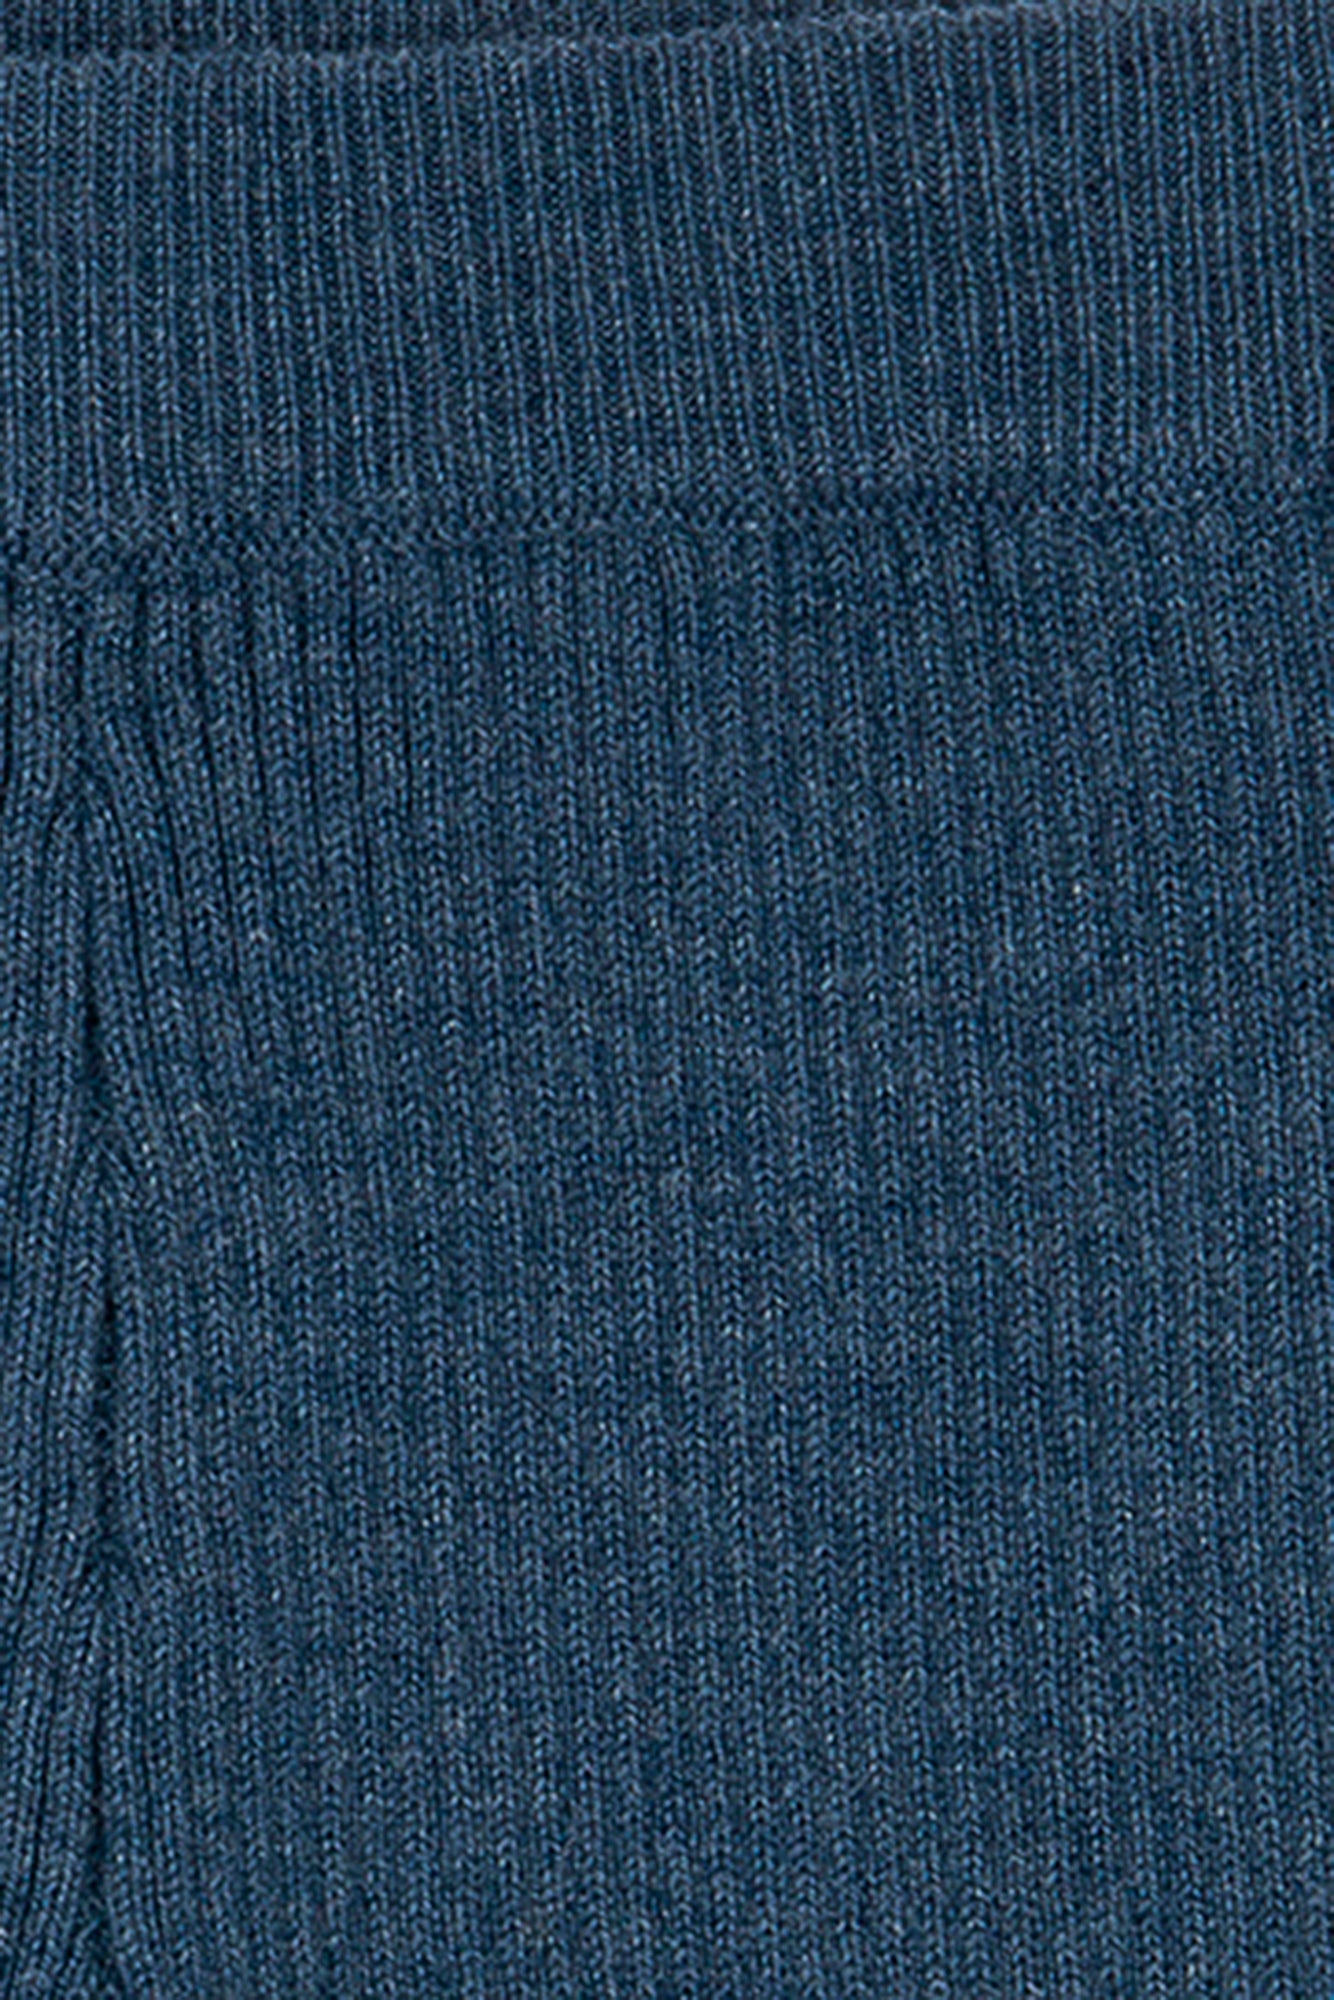 Legging - Blue Baby in a knit